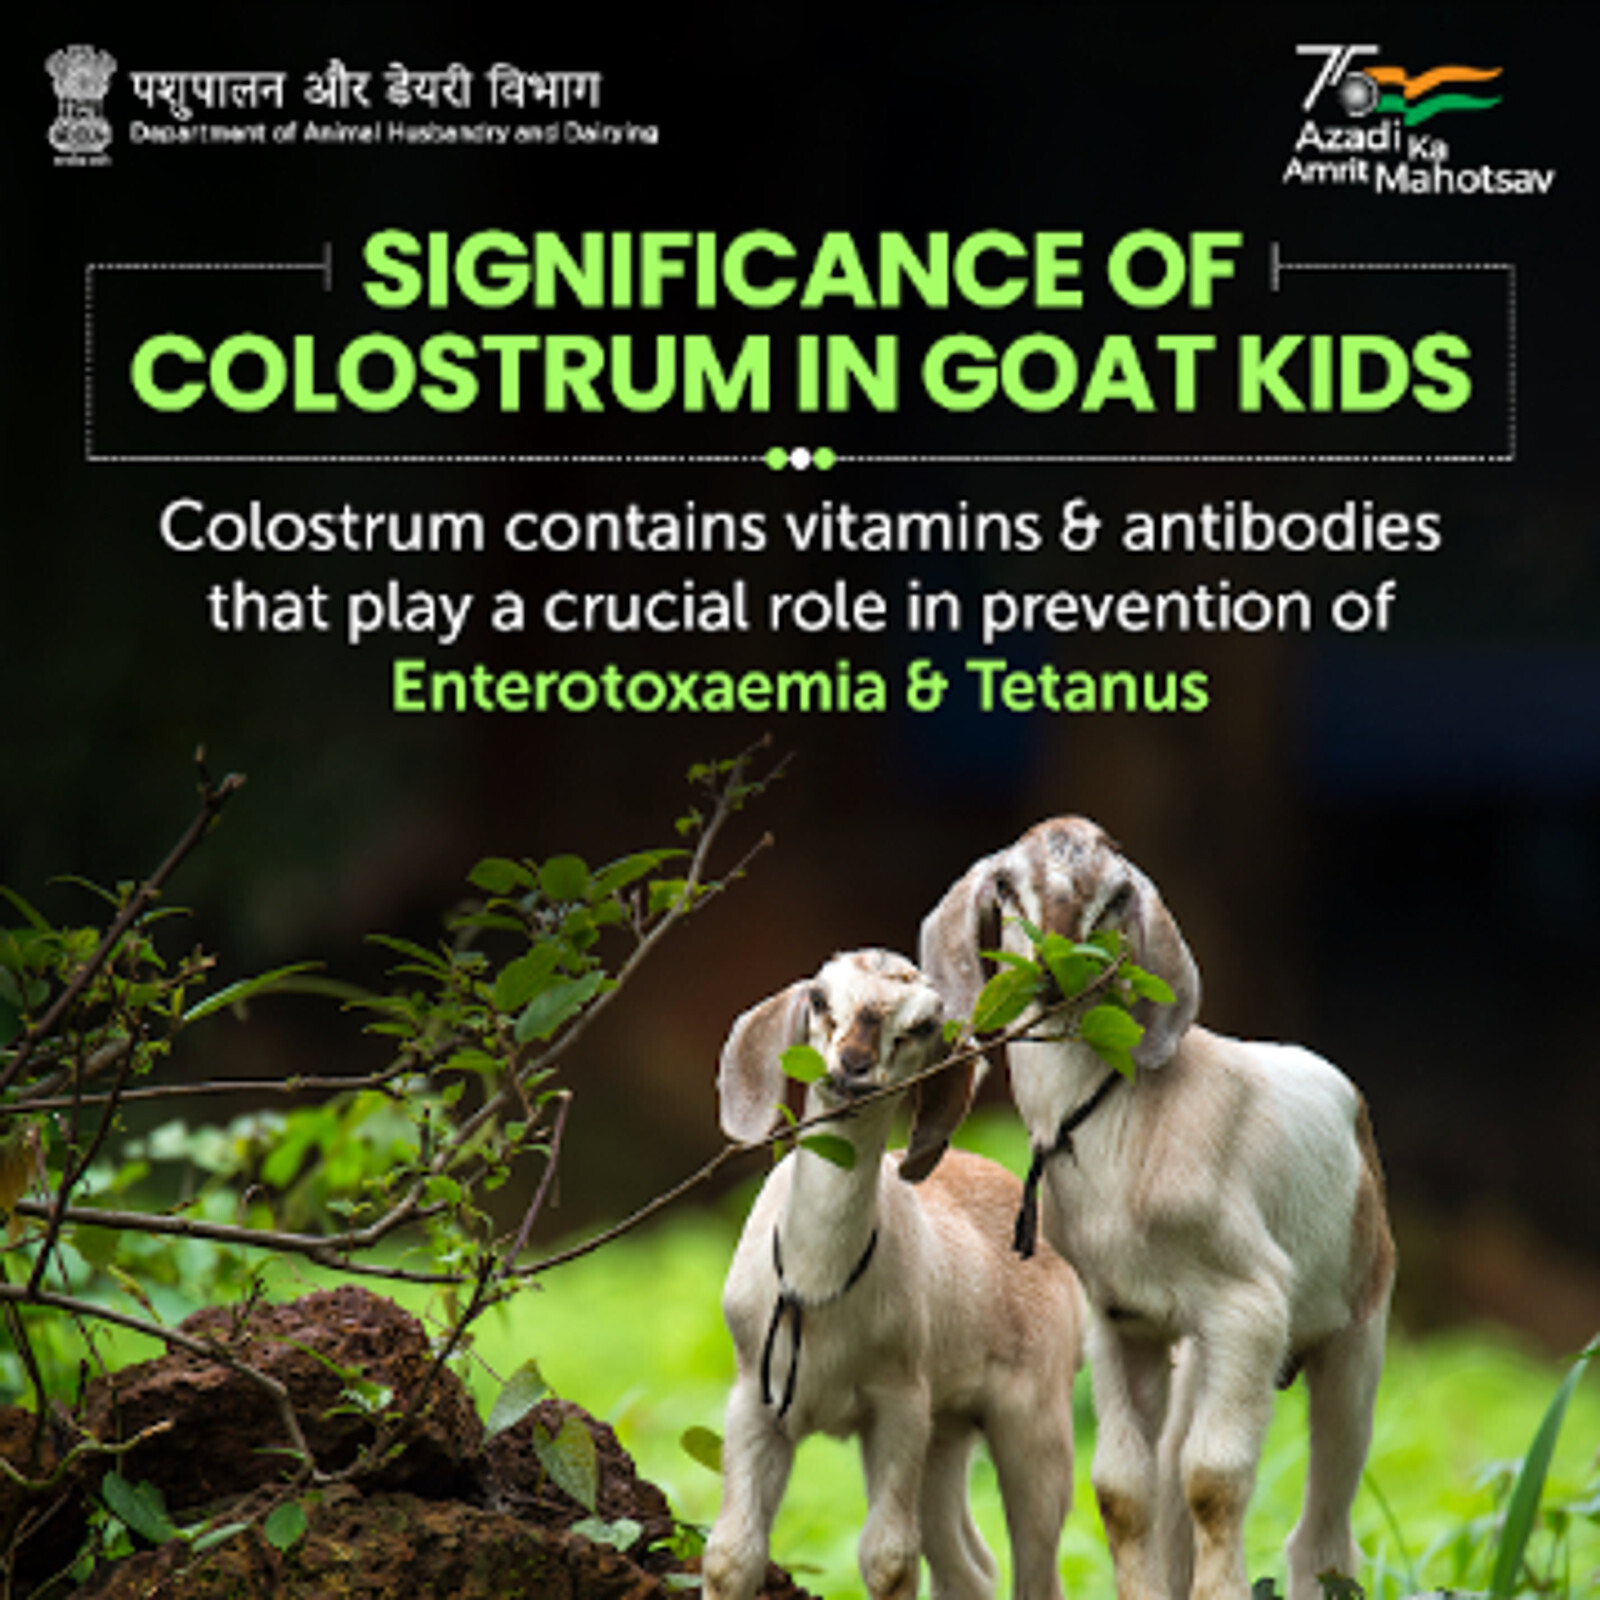 Koo by Dept of Animal Husbandry & Dairying, Min of FAH&D (@dept_of_ahd):  #Goat keepers must ensure kids consume colostrum a